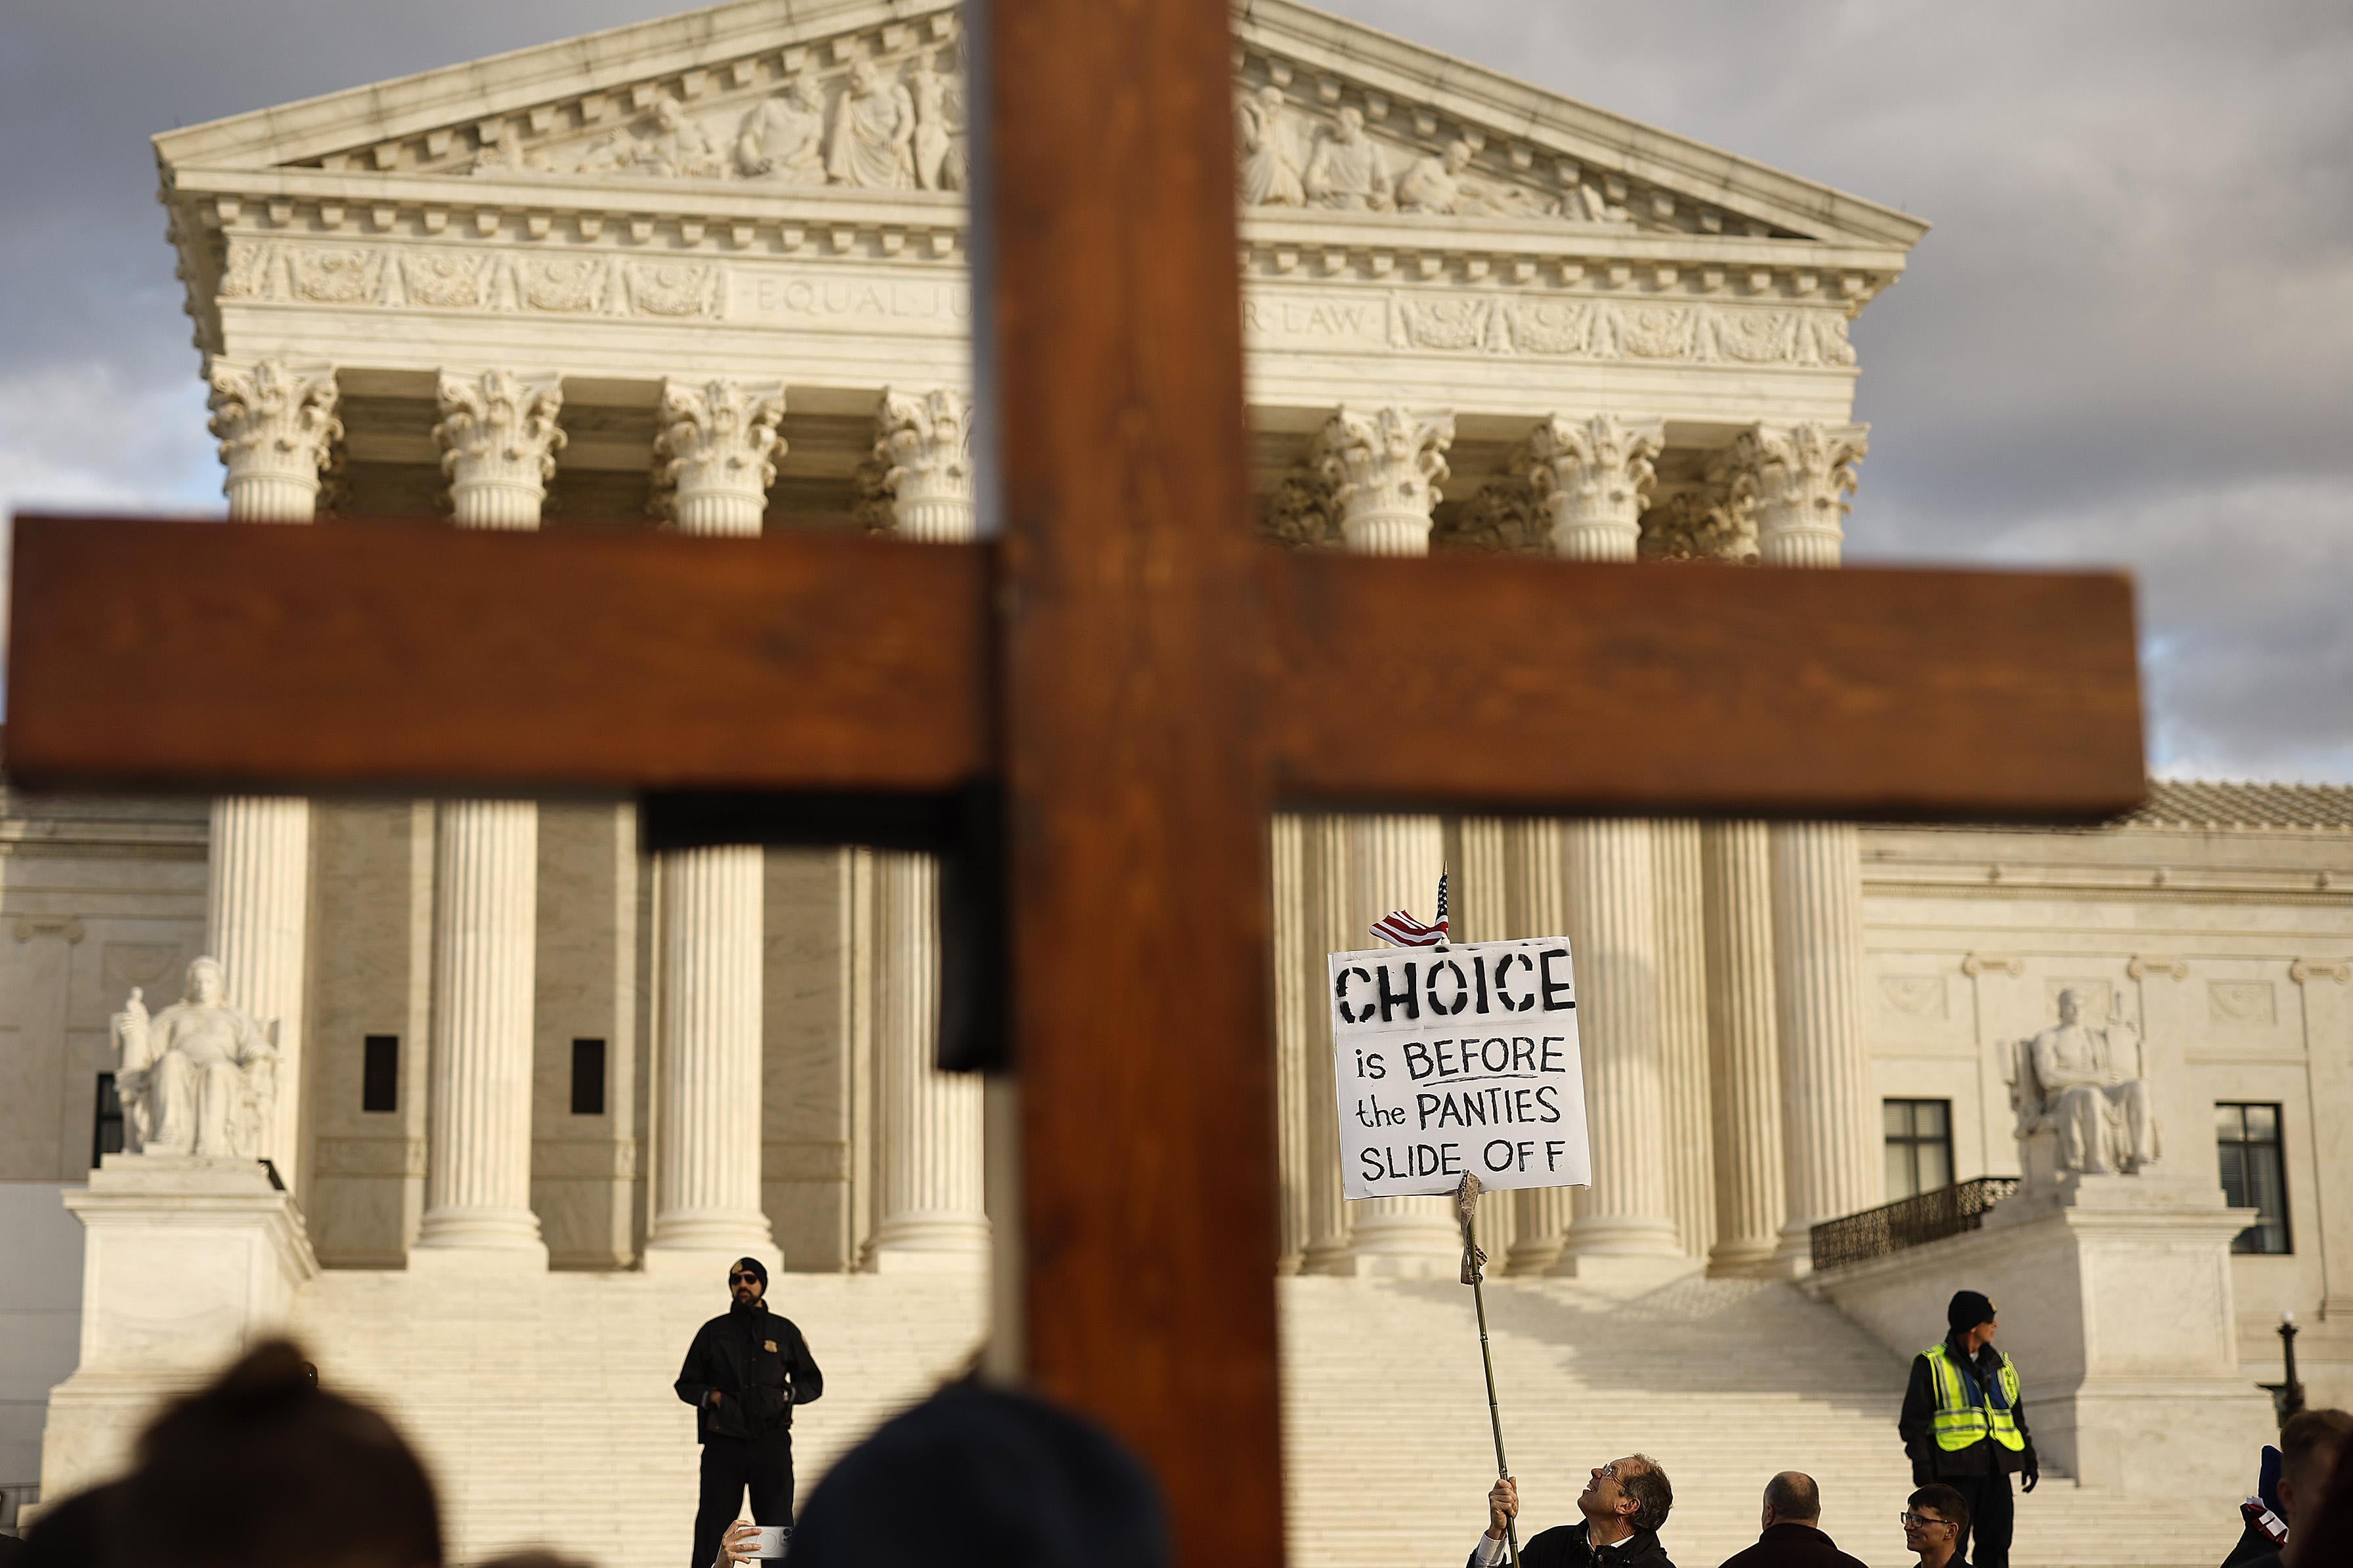 A photo of the March for Life in Washington D.C.—the image shows a cross over the Supreme Court.